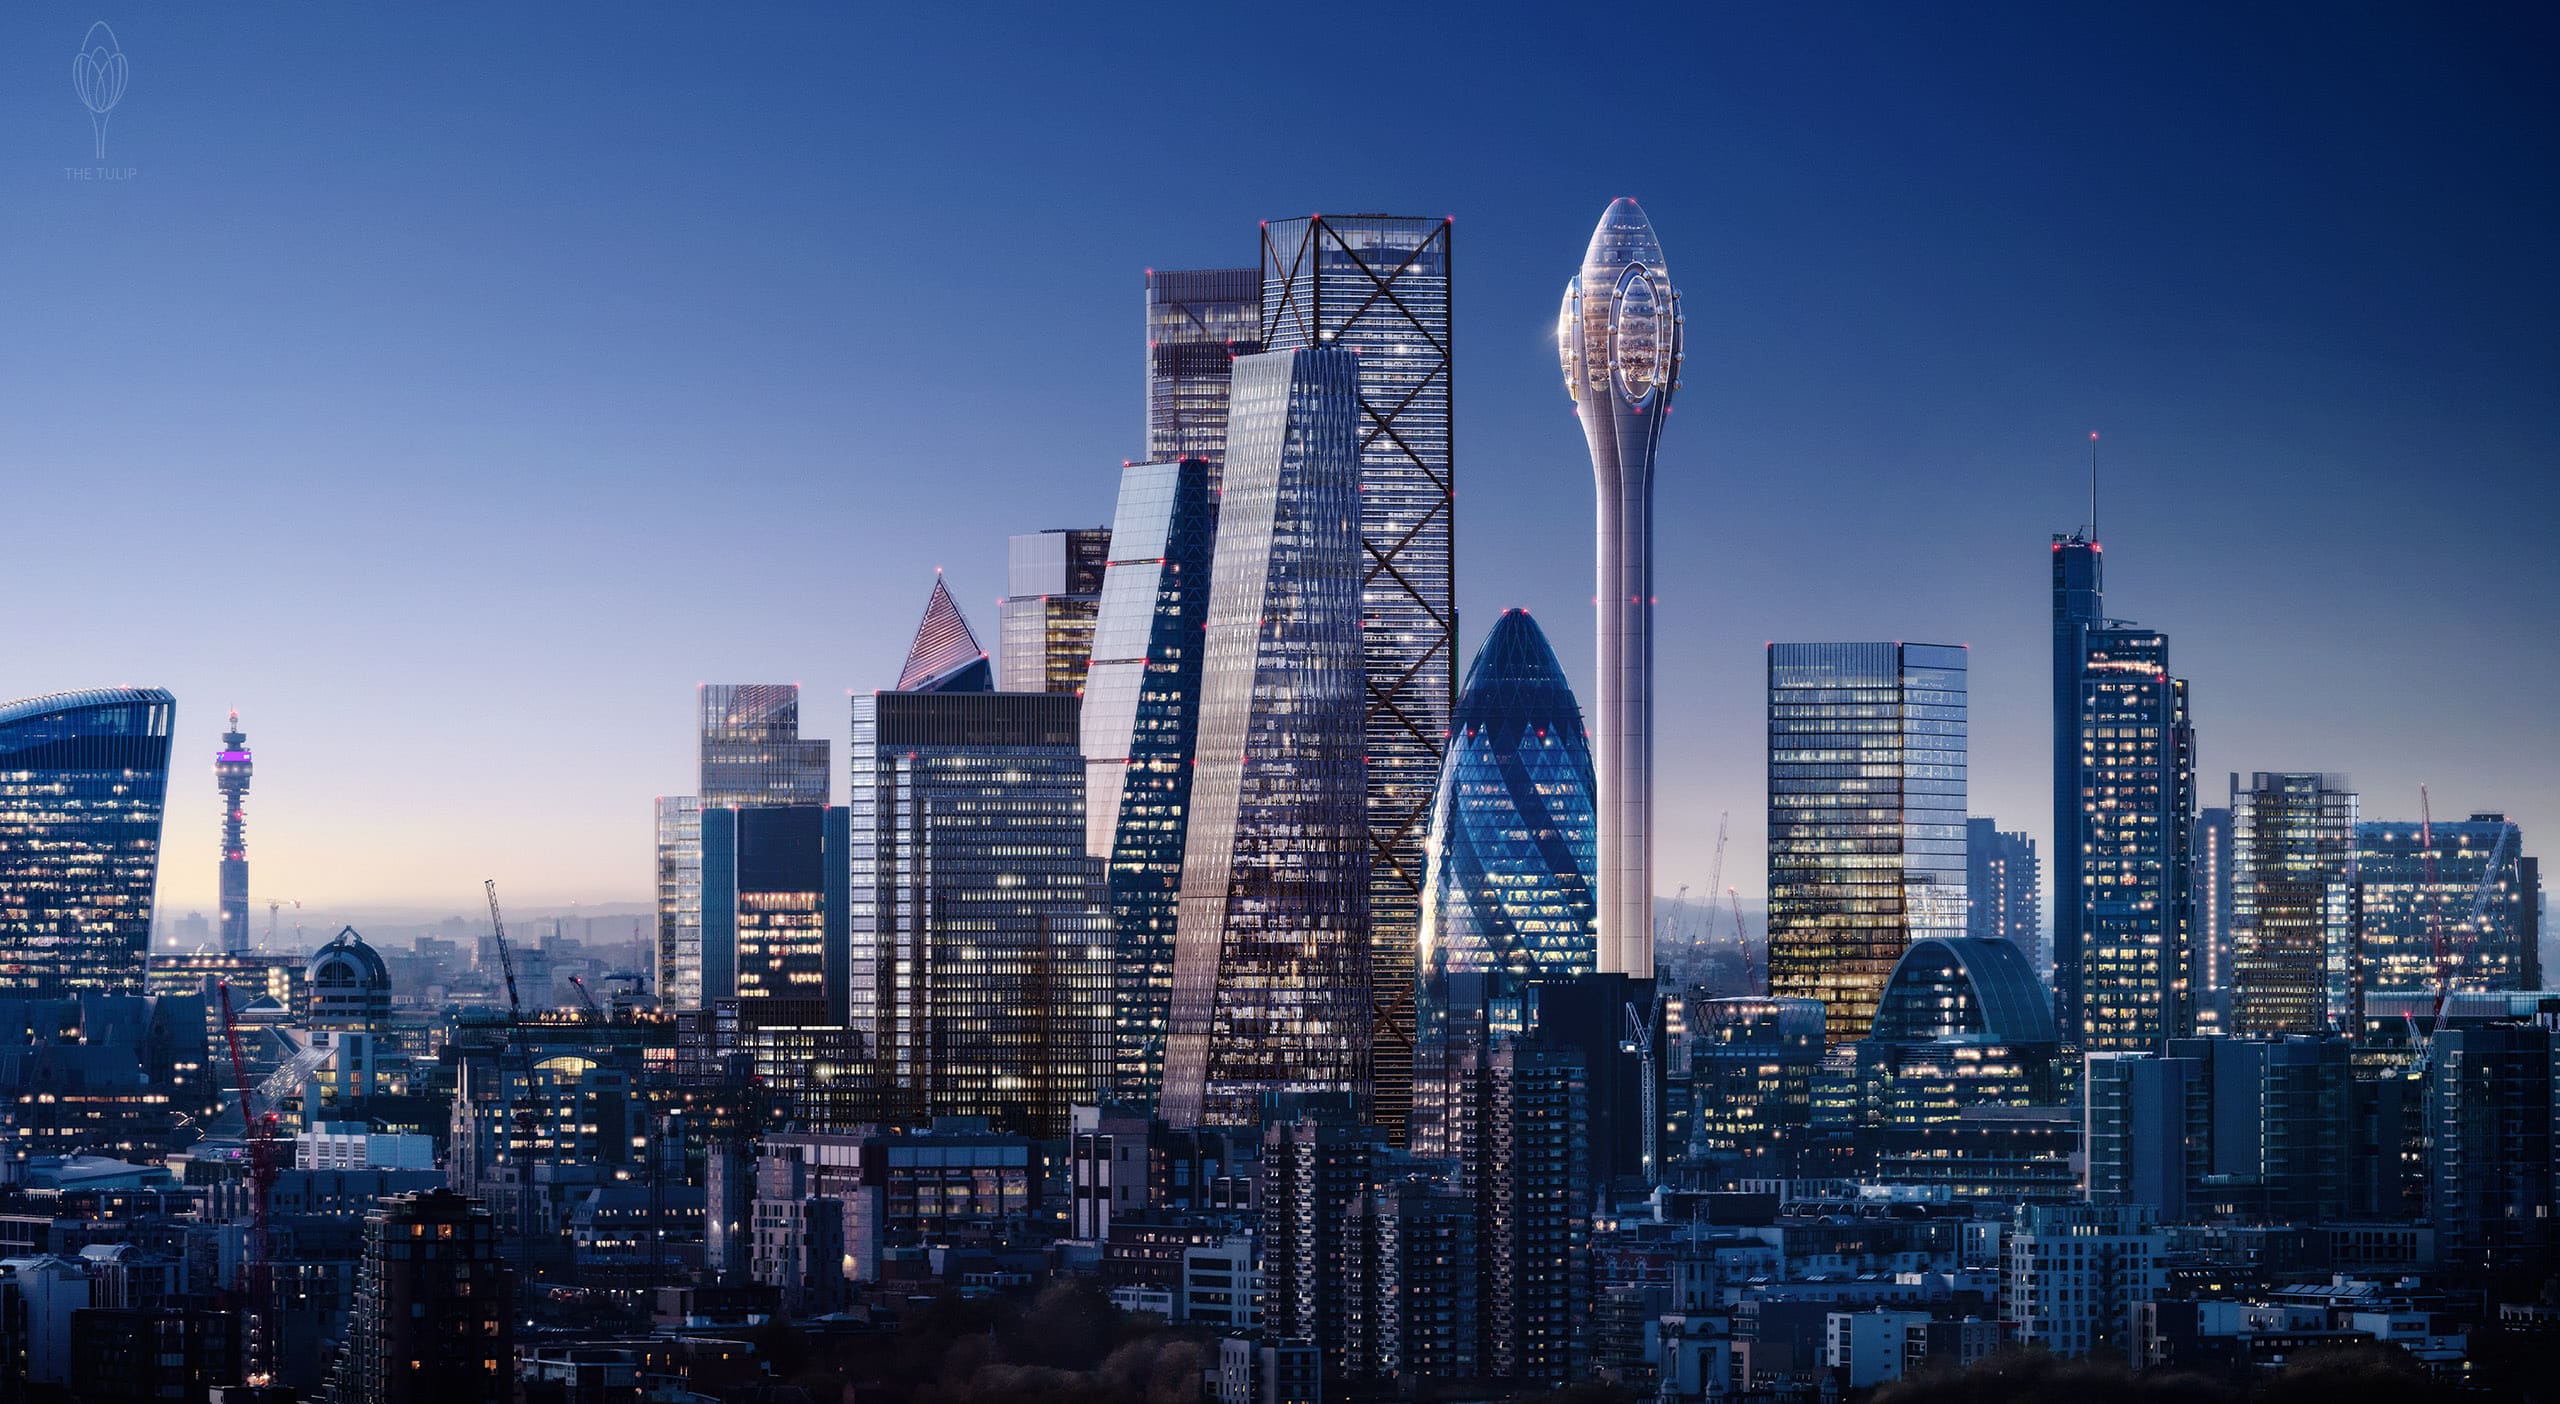 And finally... ‘Tulip’ tower plan to accompany The Gherkin